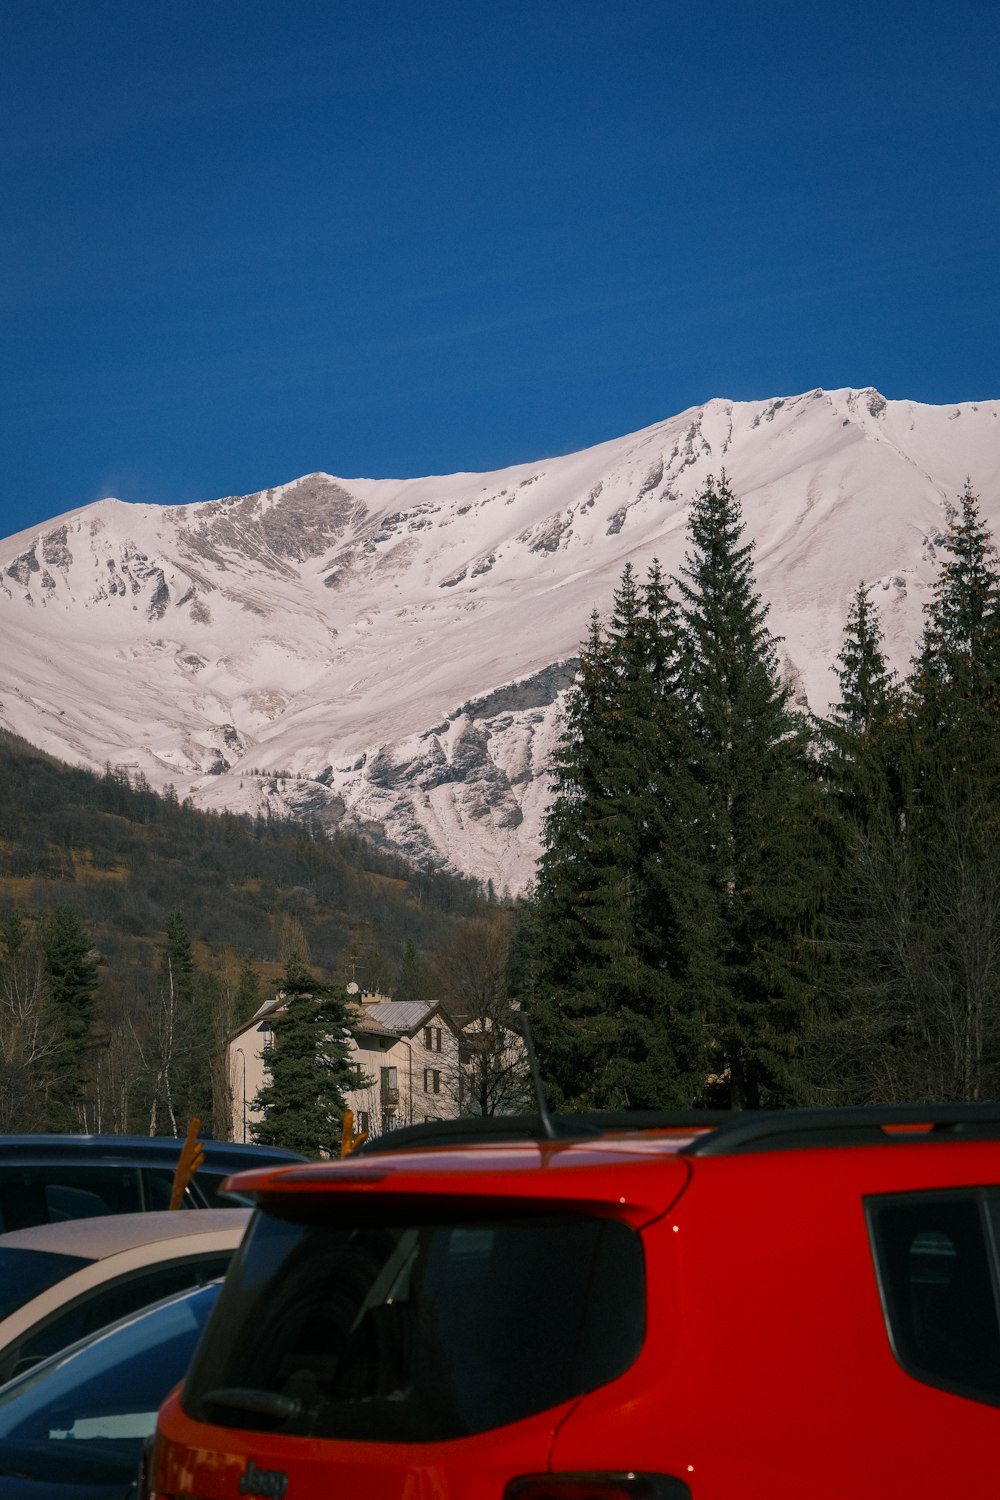 a red car parked in front of a snow covered mountain